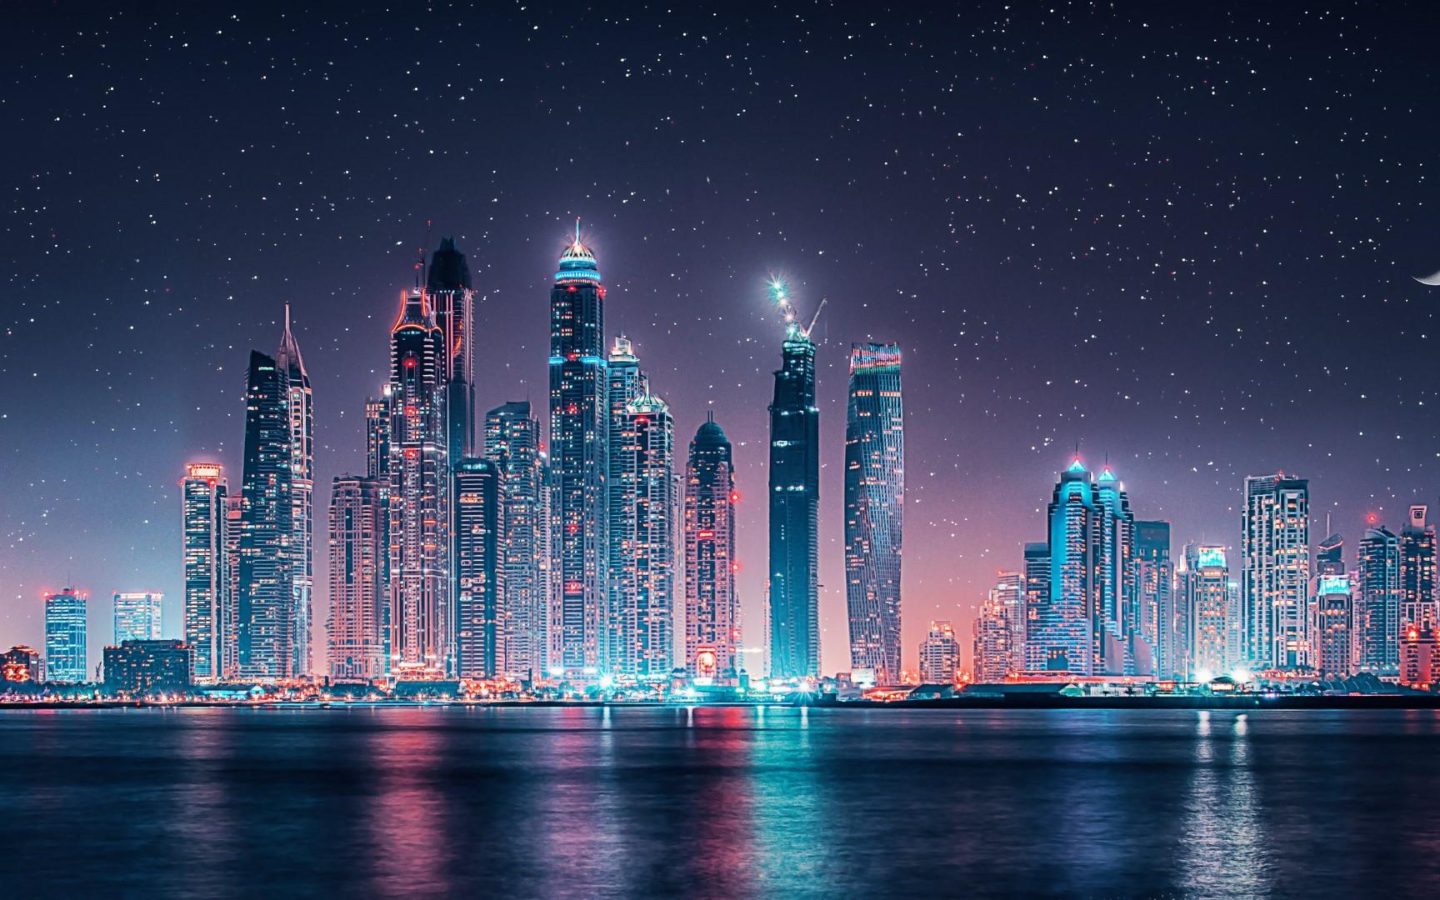 Dubai Skyline Starry Sky At Night Ultra HD Wallpaper For Android Mobile Phones Tablet And Lapx1080, Wallpaper13.com